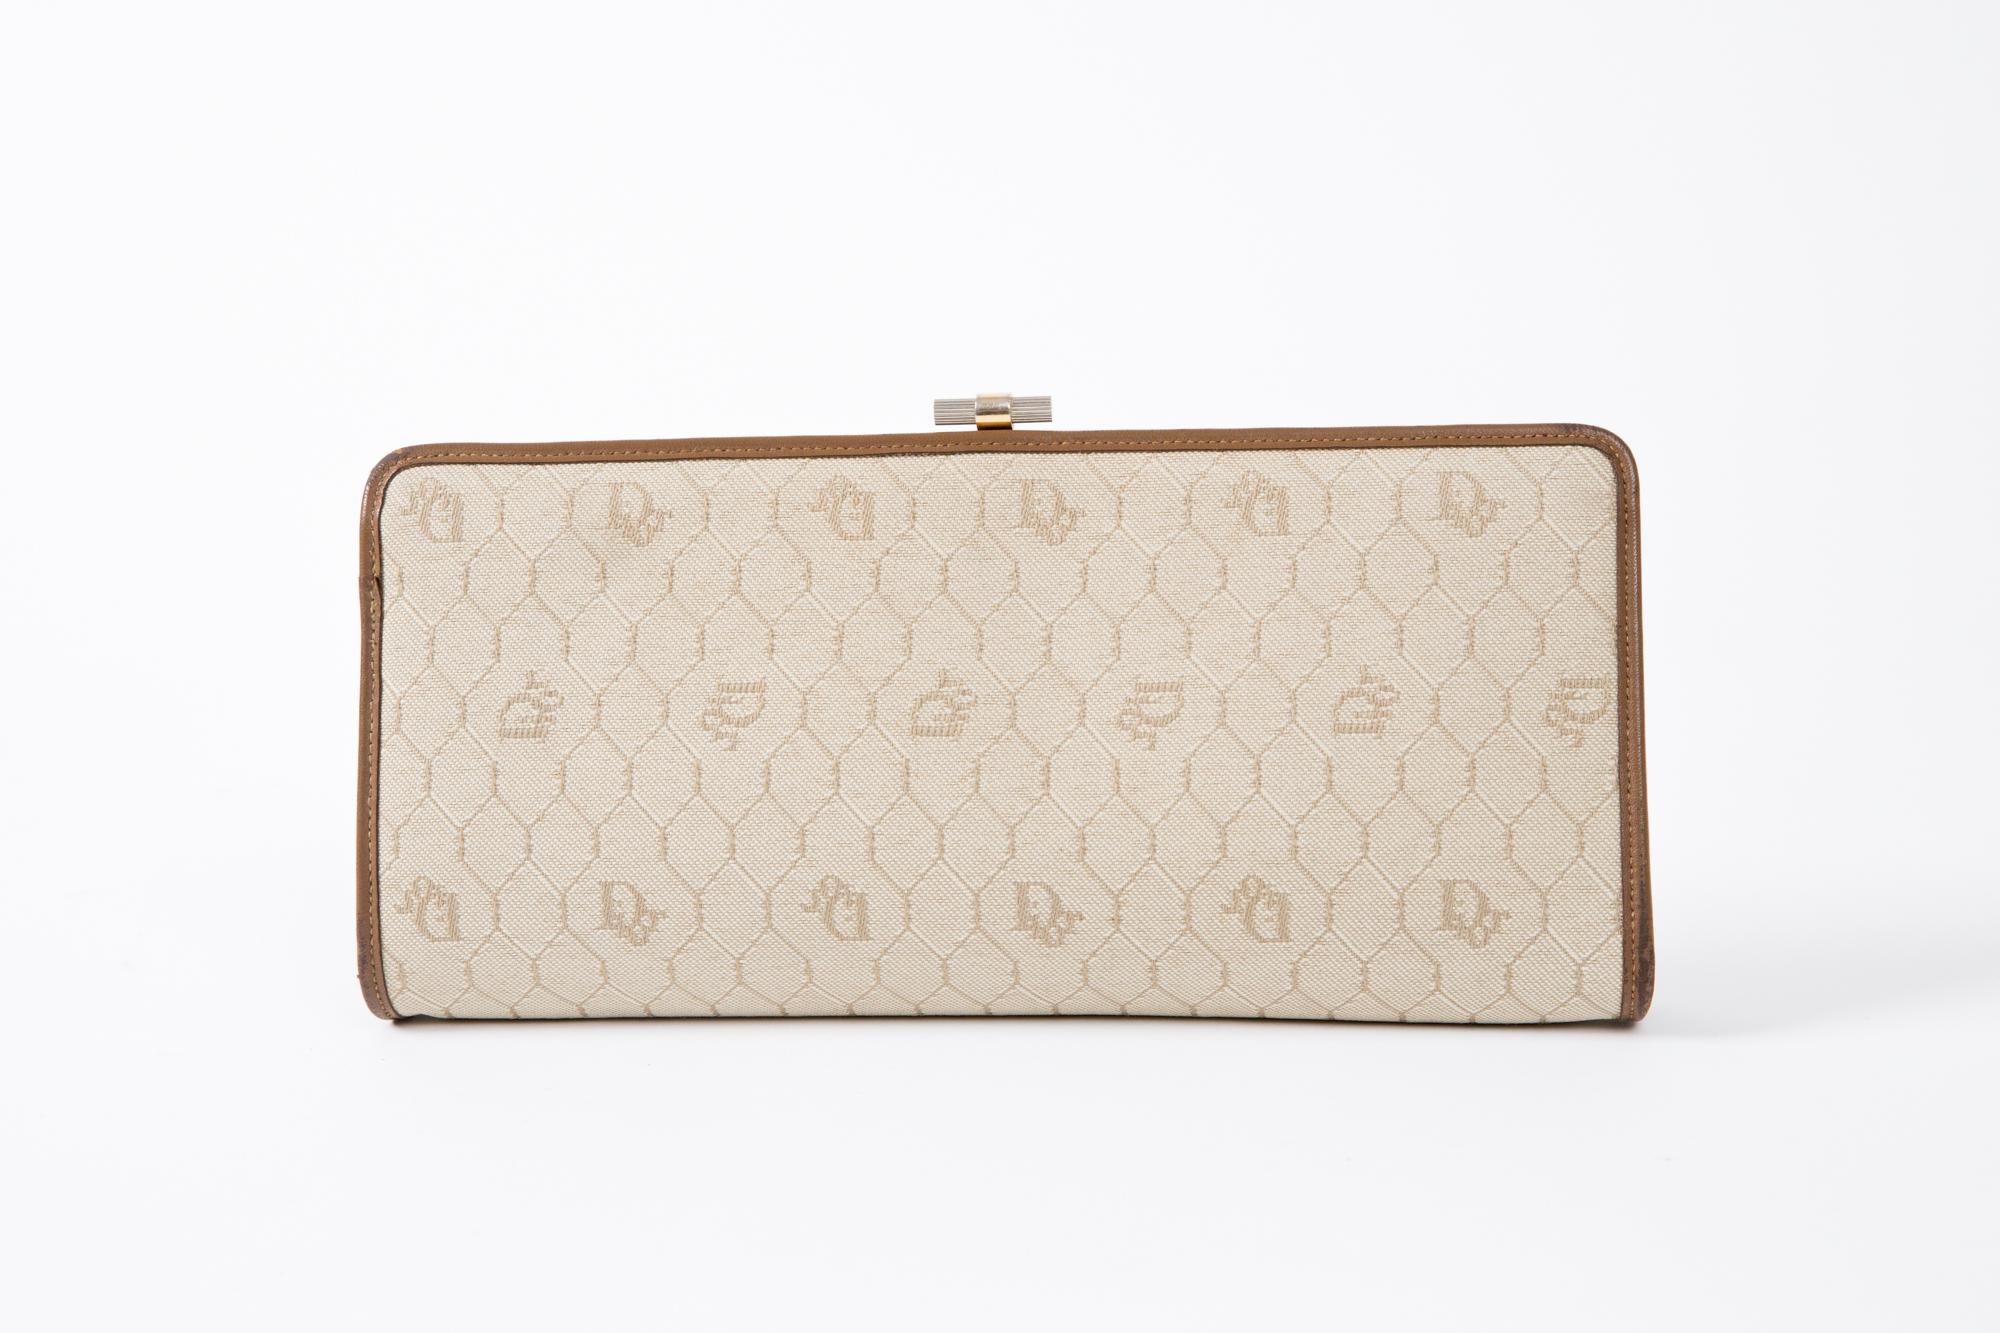 1970s Dior camel cotton canvas monogram logo clutch featuring an all over logo pattern with nut leather finishing, top logo claps opening, an inside logo stamp. 
Width 11in (28cm)
Height 5.5in. (14cm)
Depth 1.5in. (4cm)
In excellent vintage